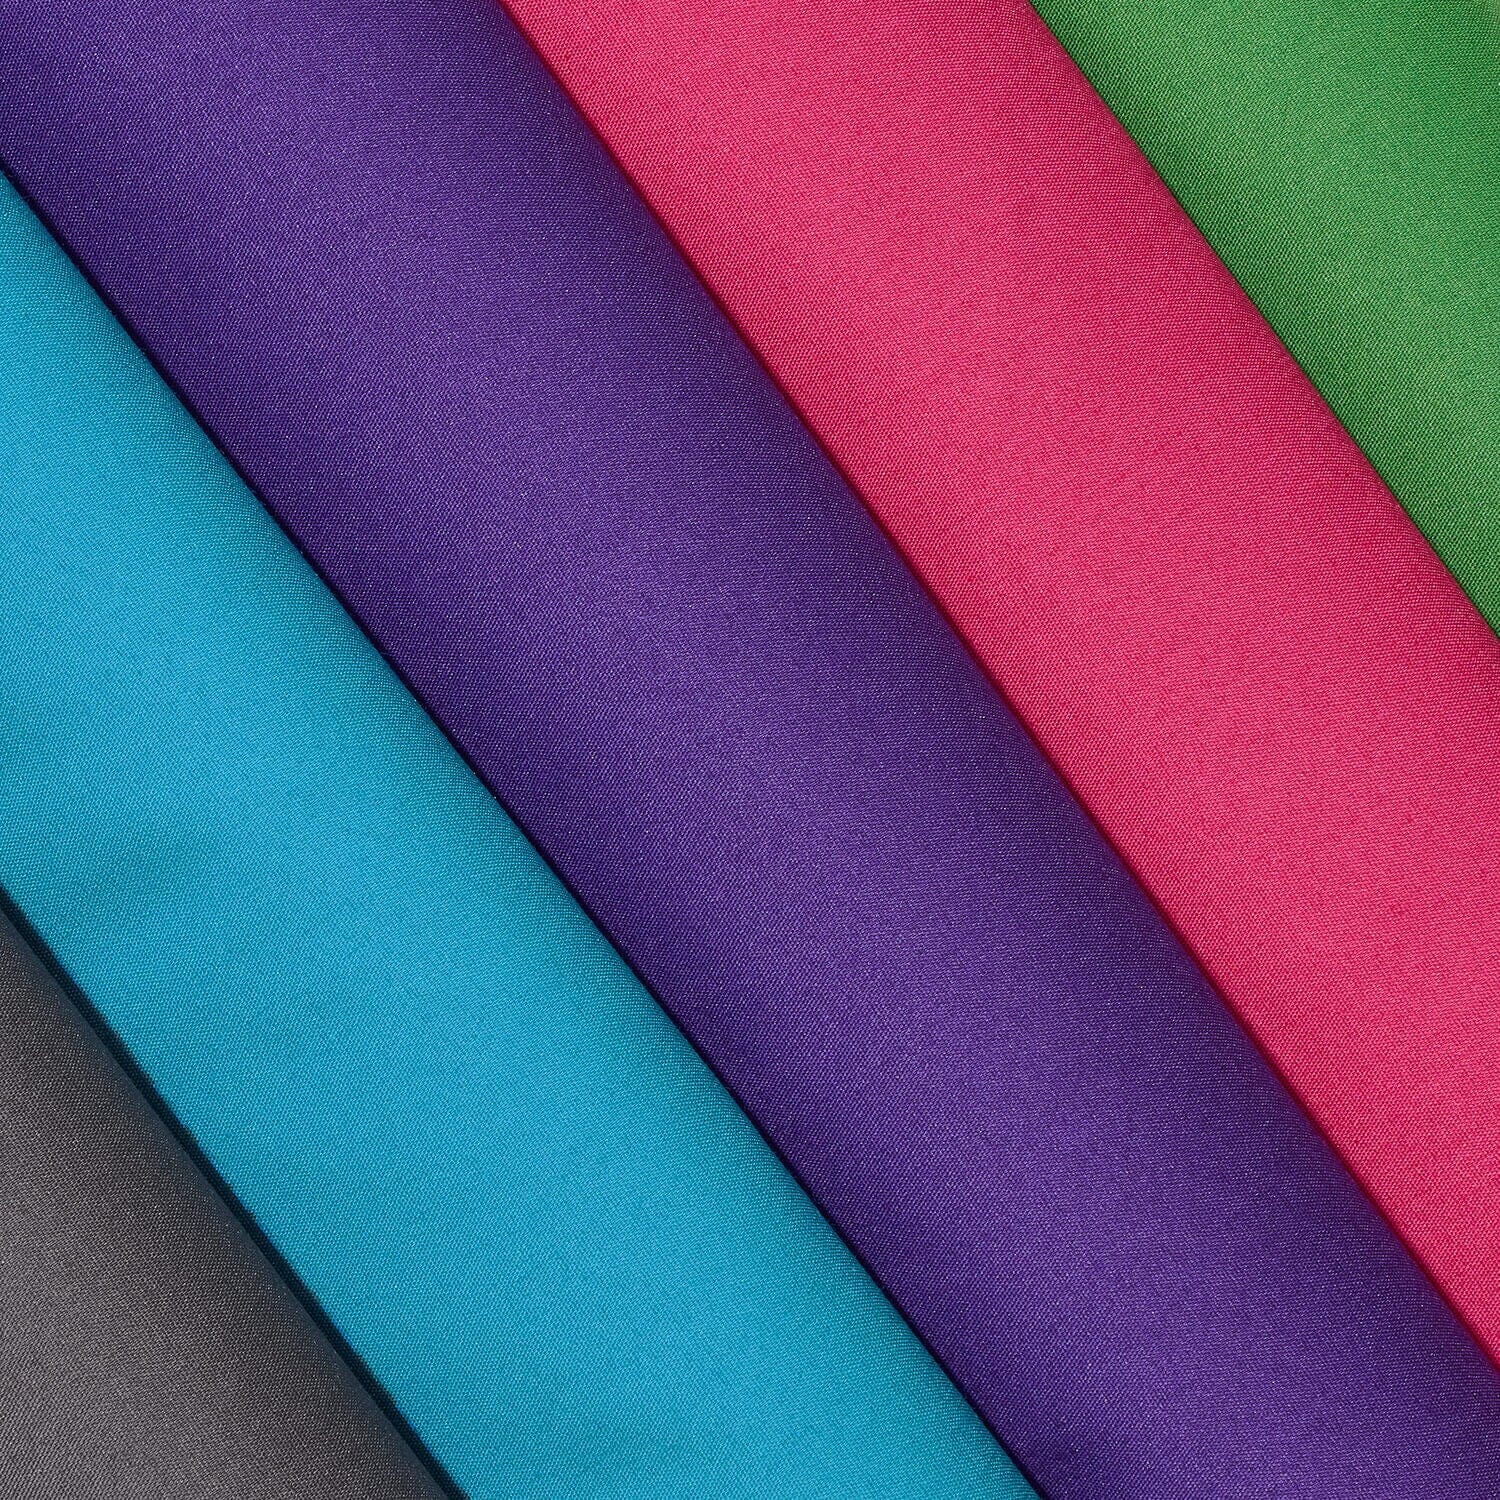 Fabric Neoprene (Scuba Knit) Polyester Spandex Roll 58 yards - 60''  W-Clearance, Wholesale Fabric